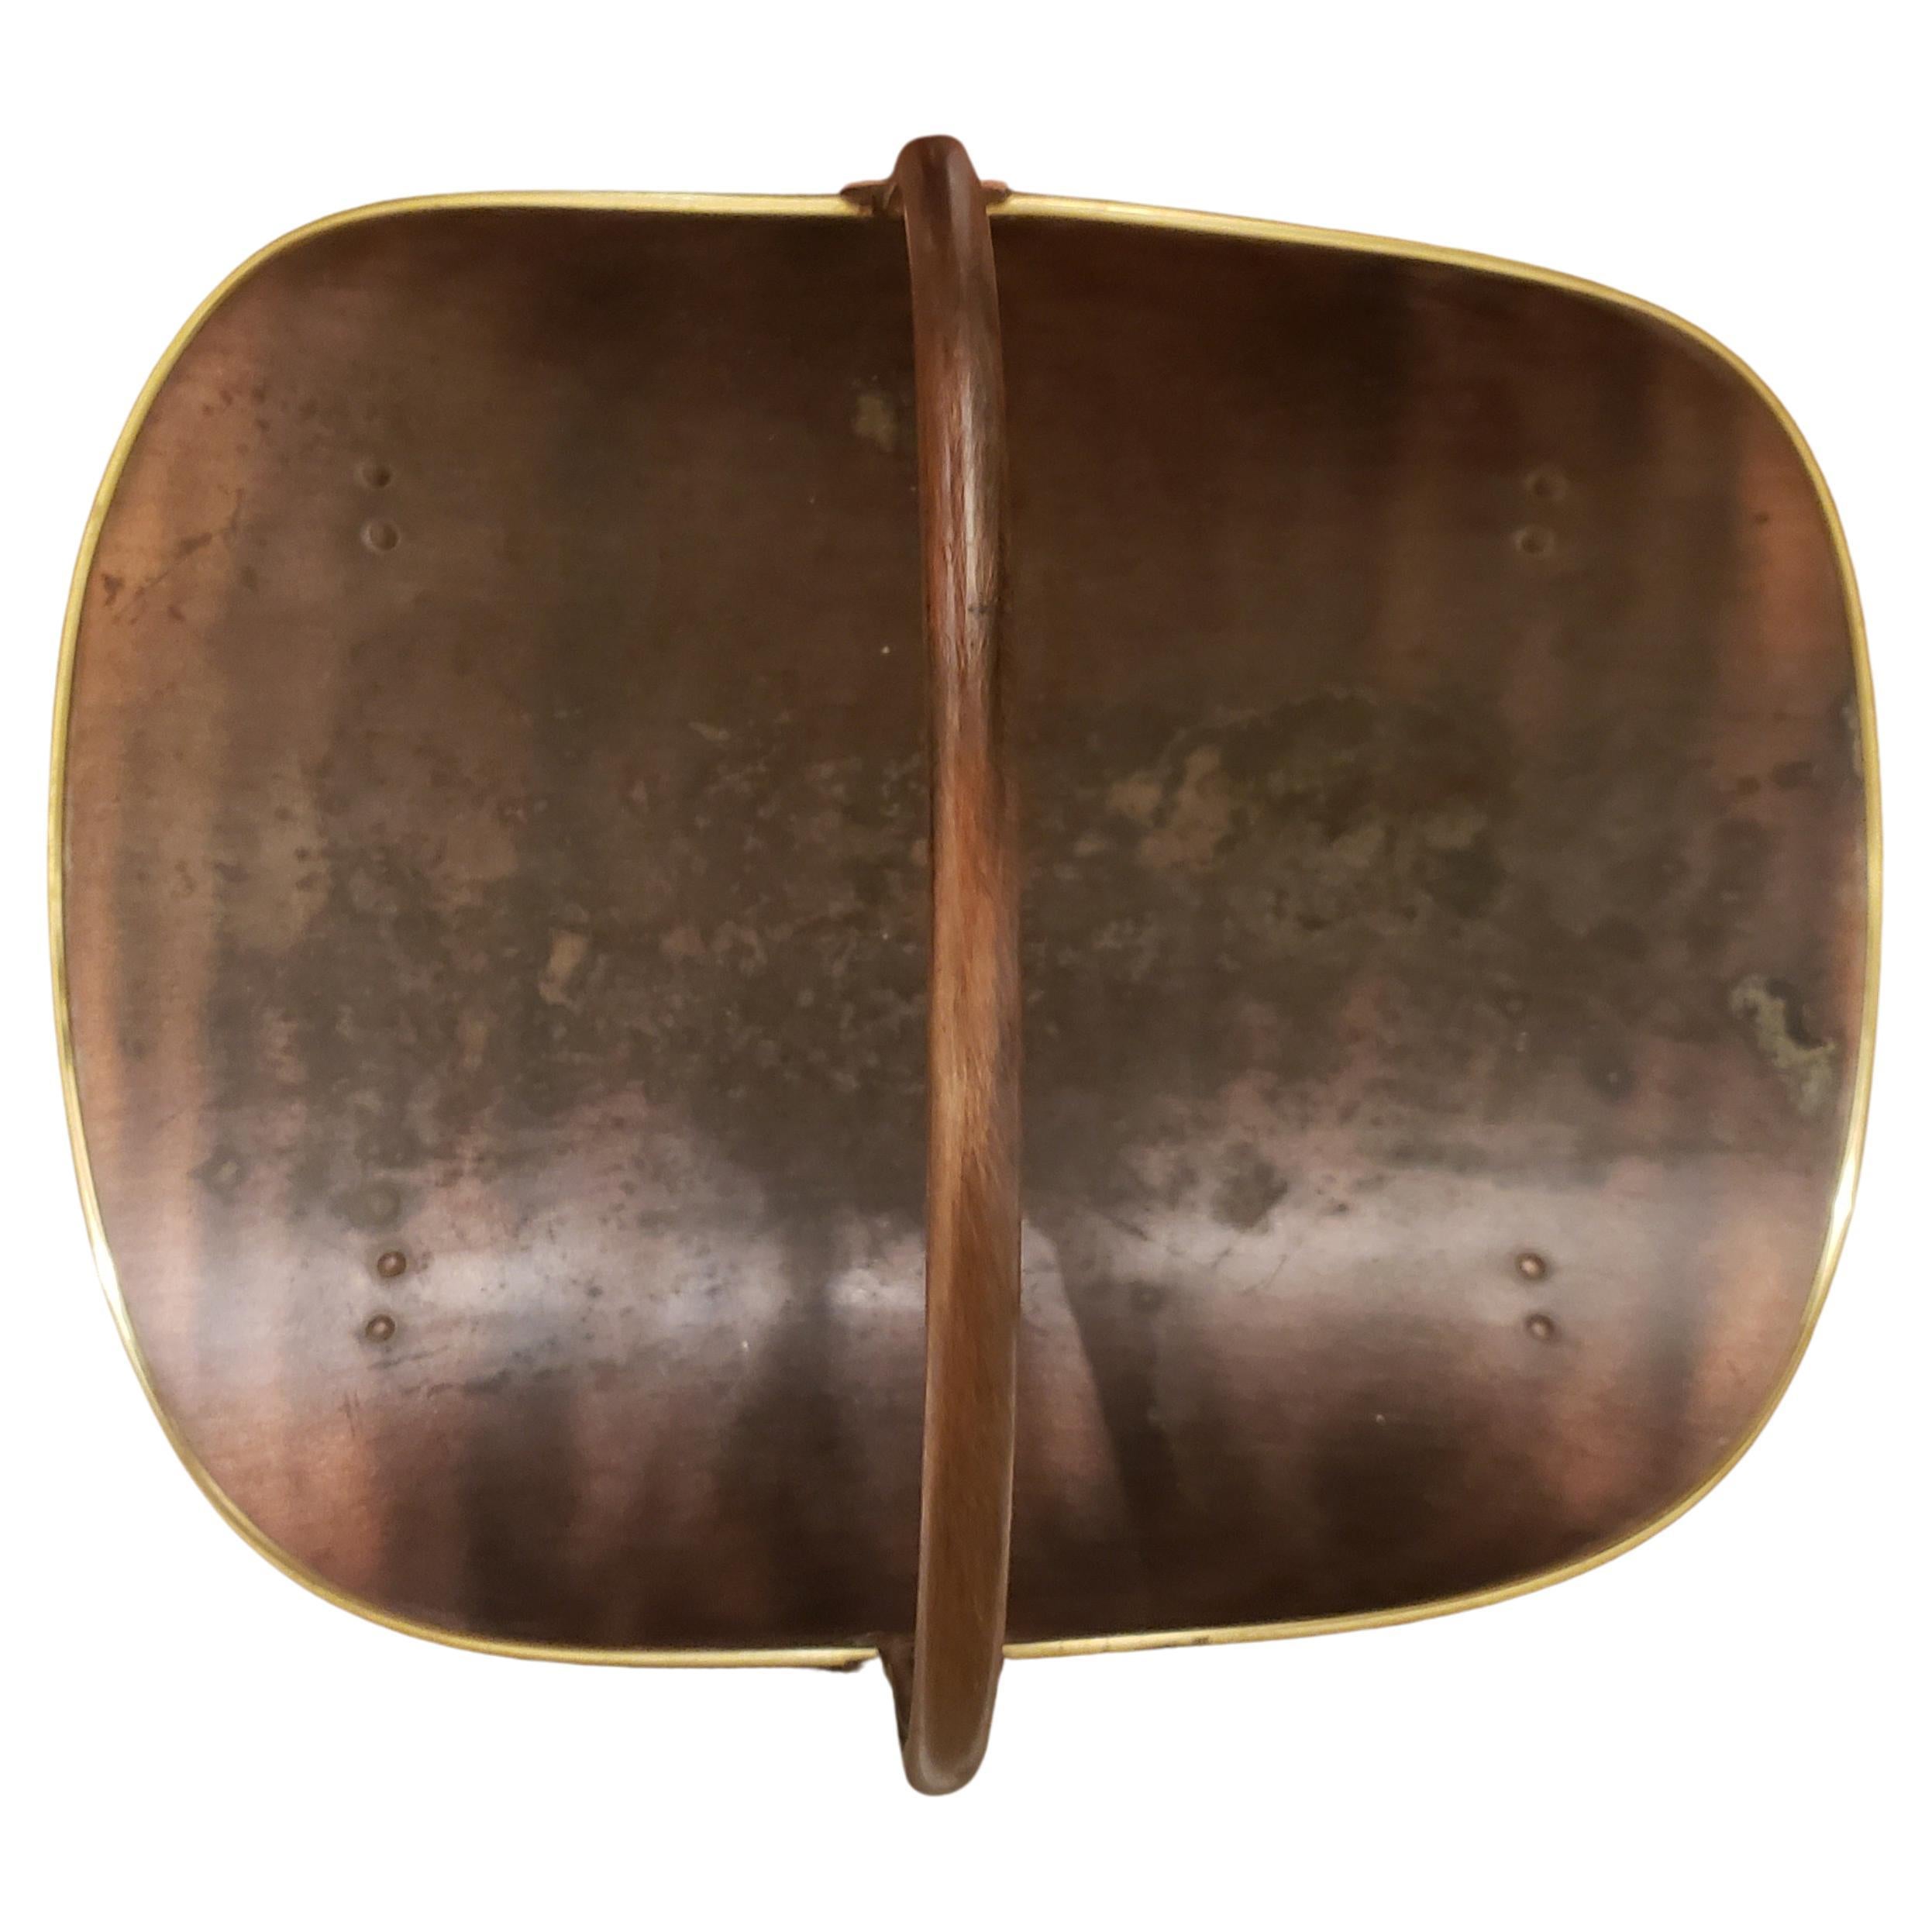 American Copper and Brass Fireplace Log Holder, circa 1970s